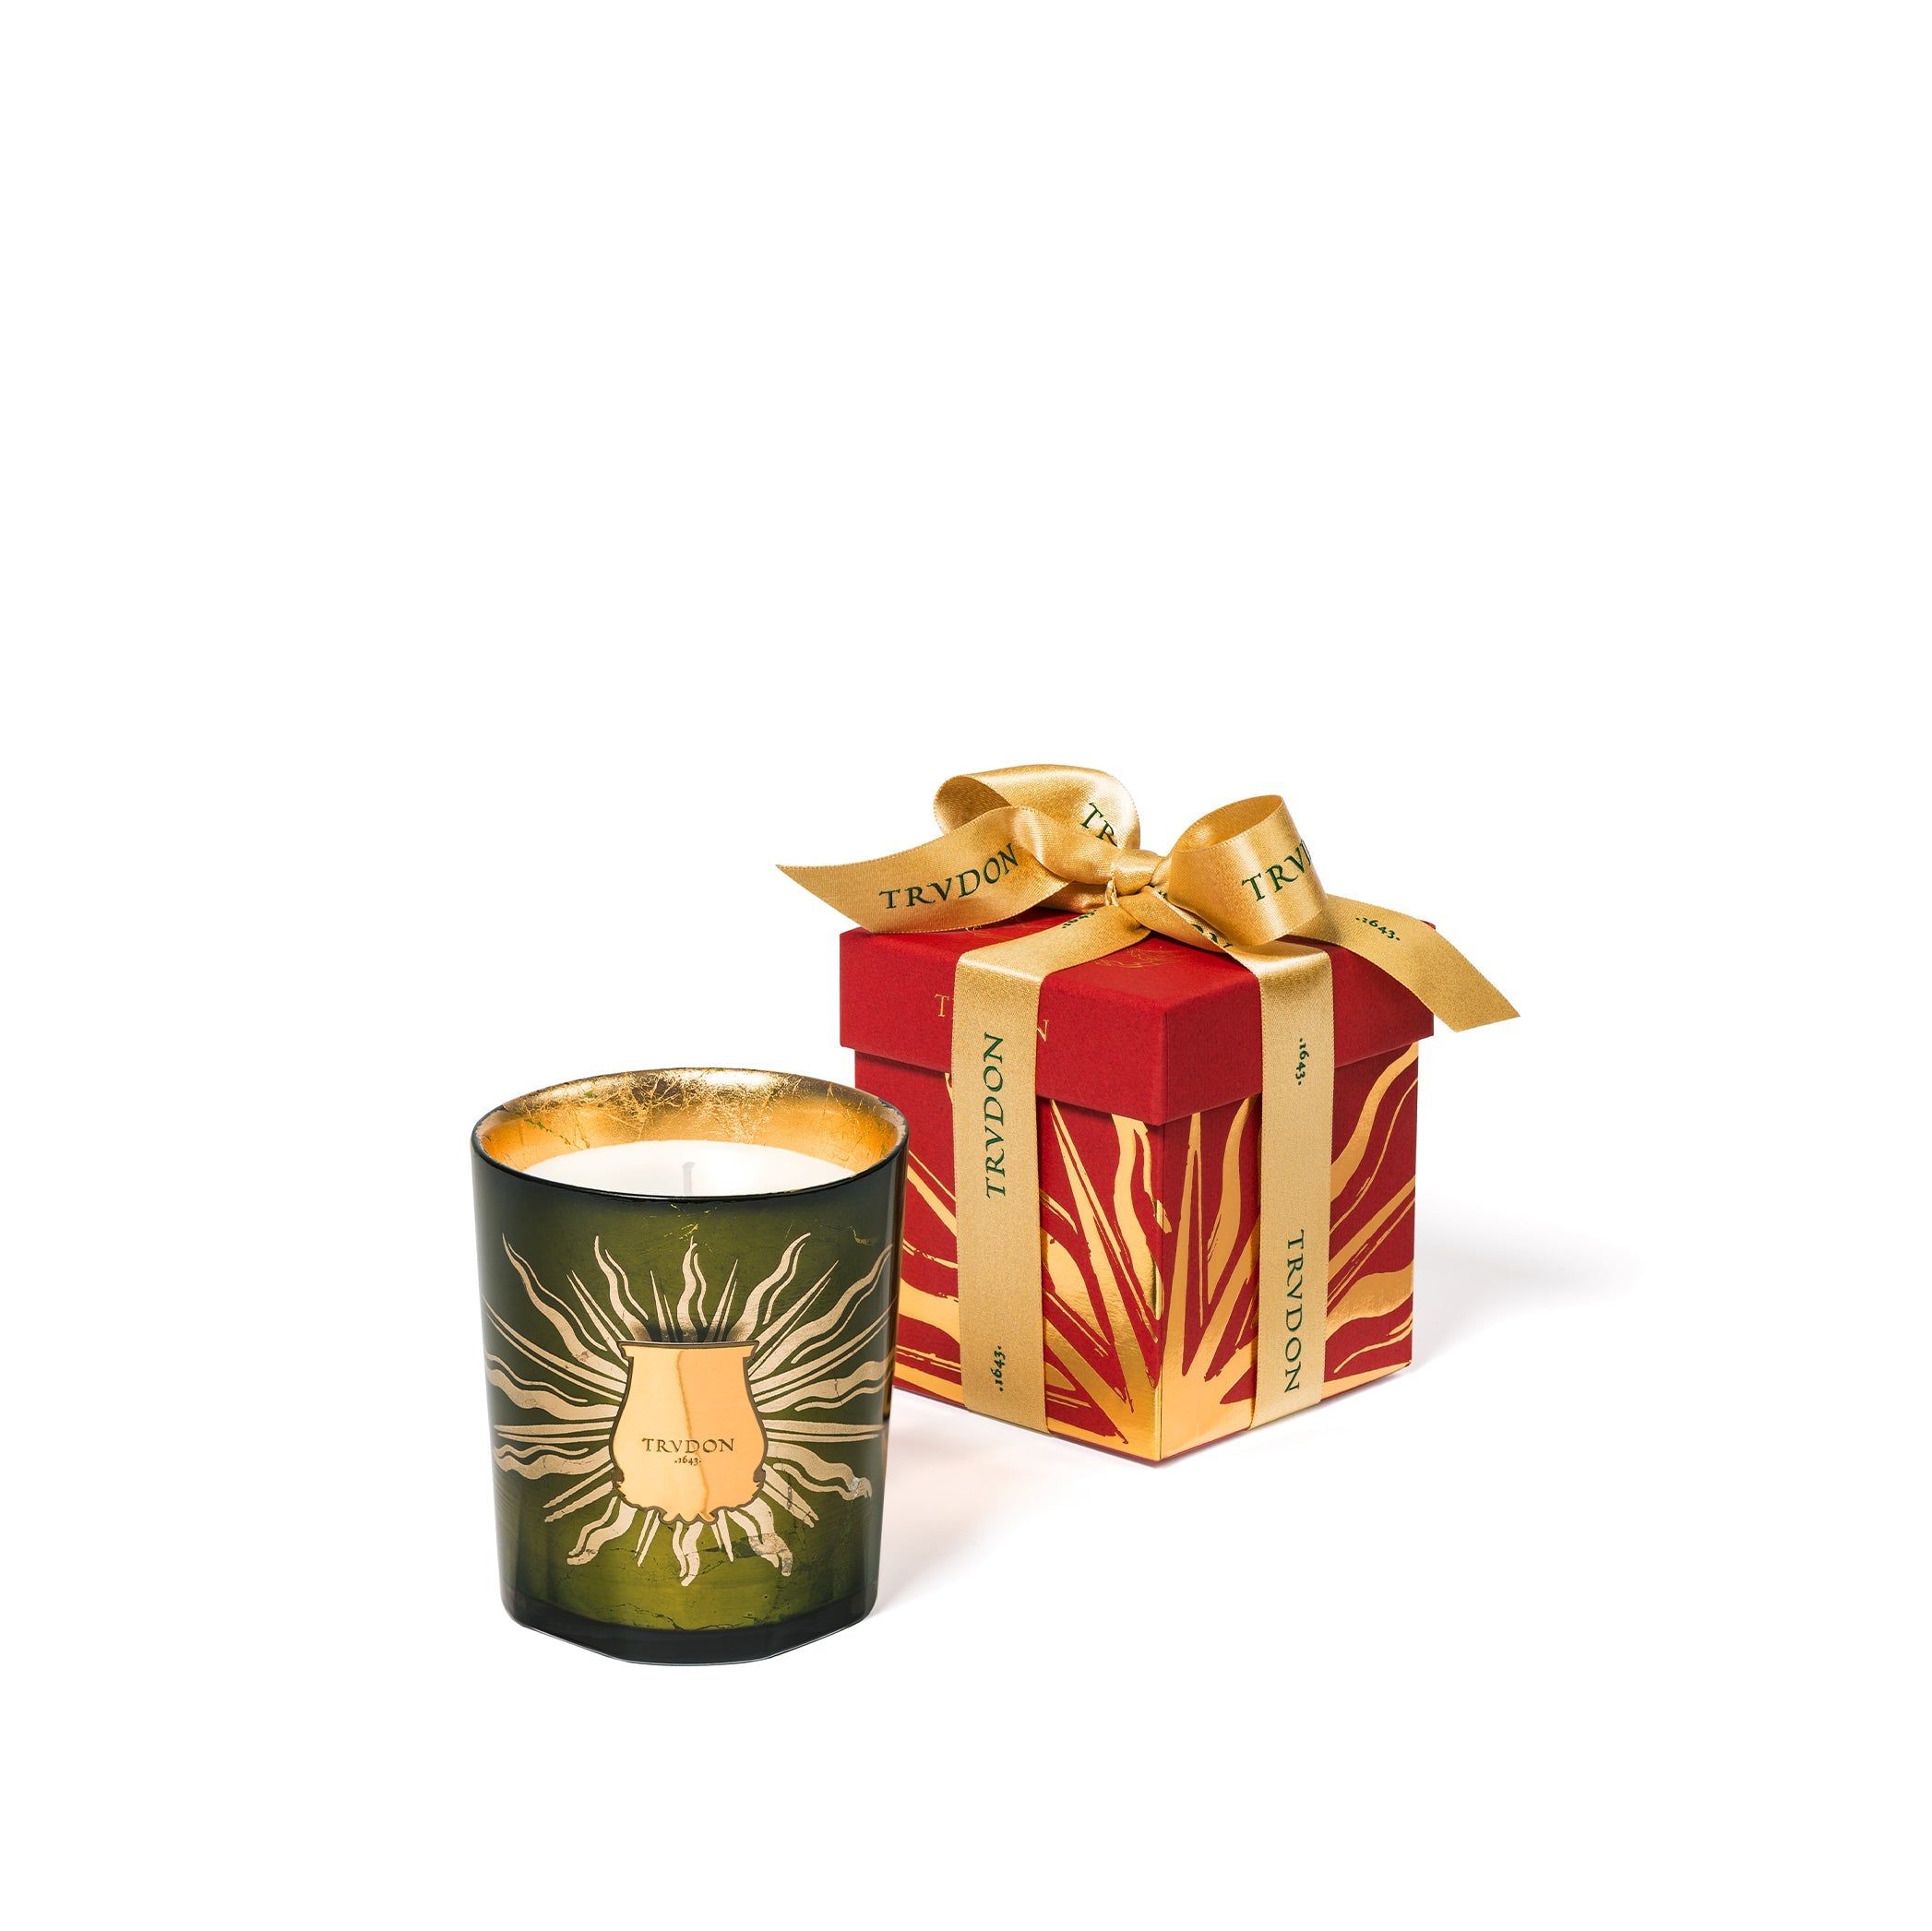 Christmas Limited Edition Astral Gabriel Candle by Trudon, 270g